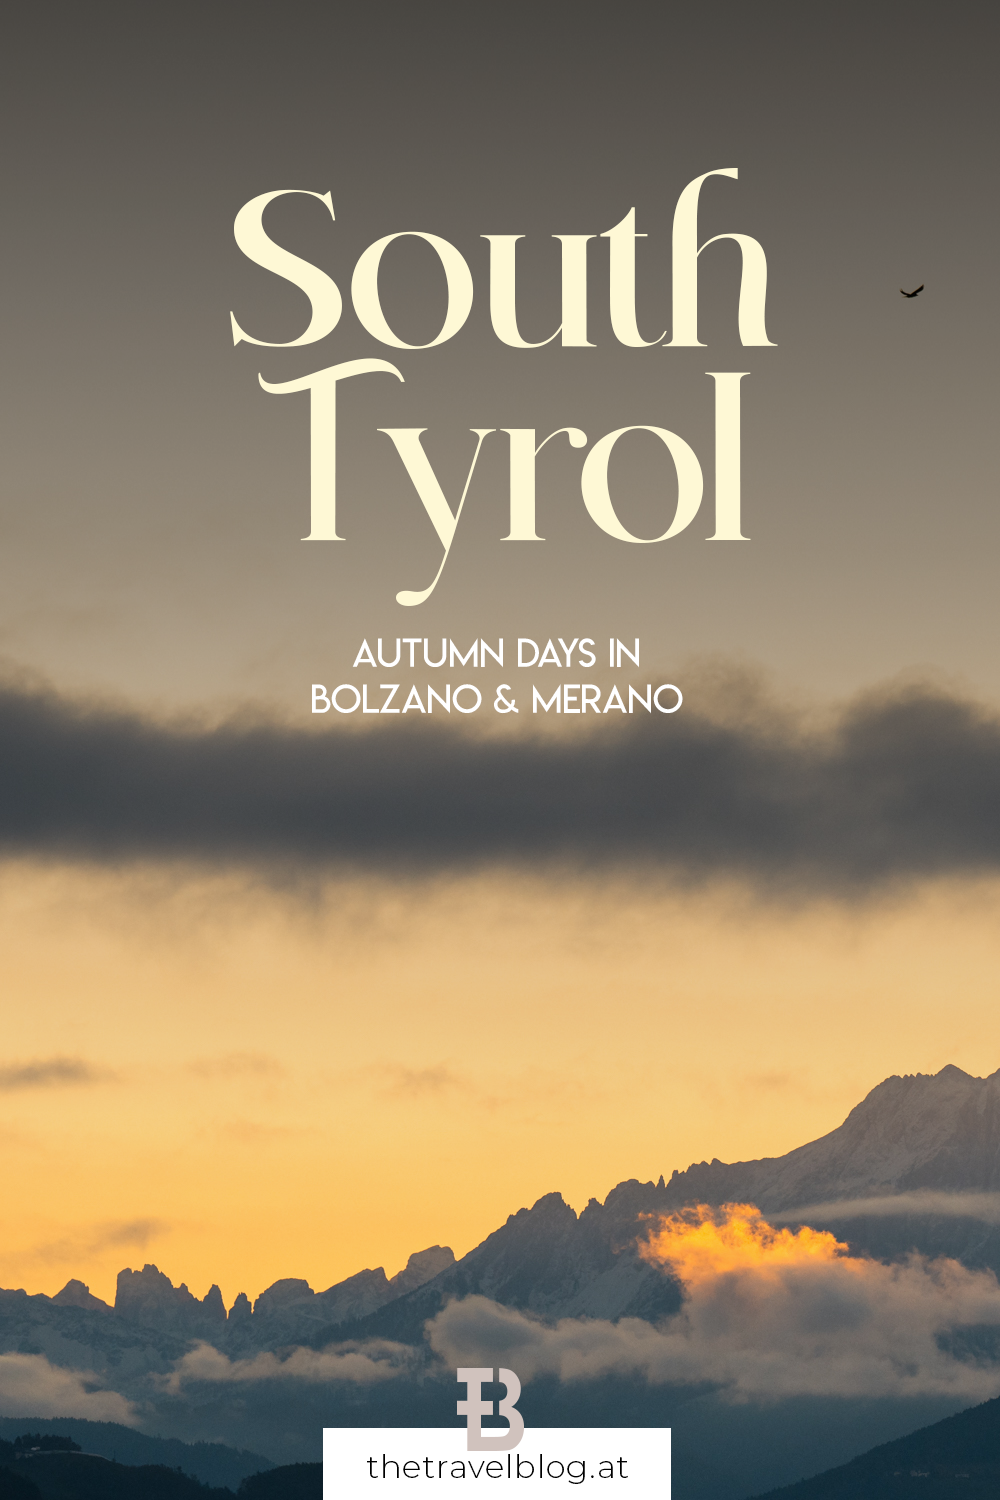 Travel Guide: From Merano to Bolzano - an autumn trip to South Tyrol